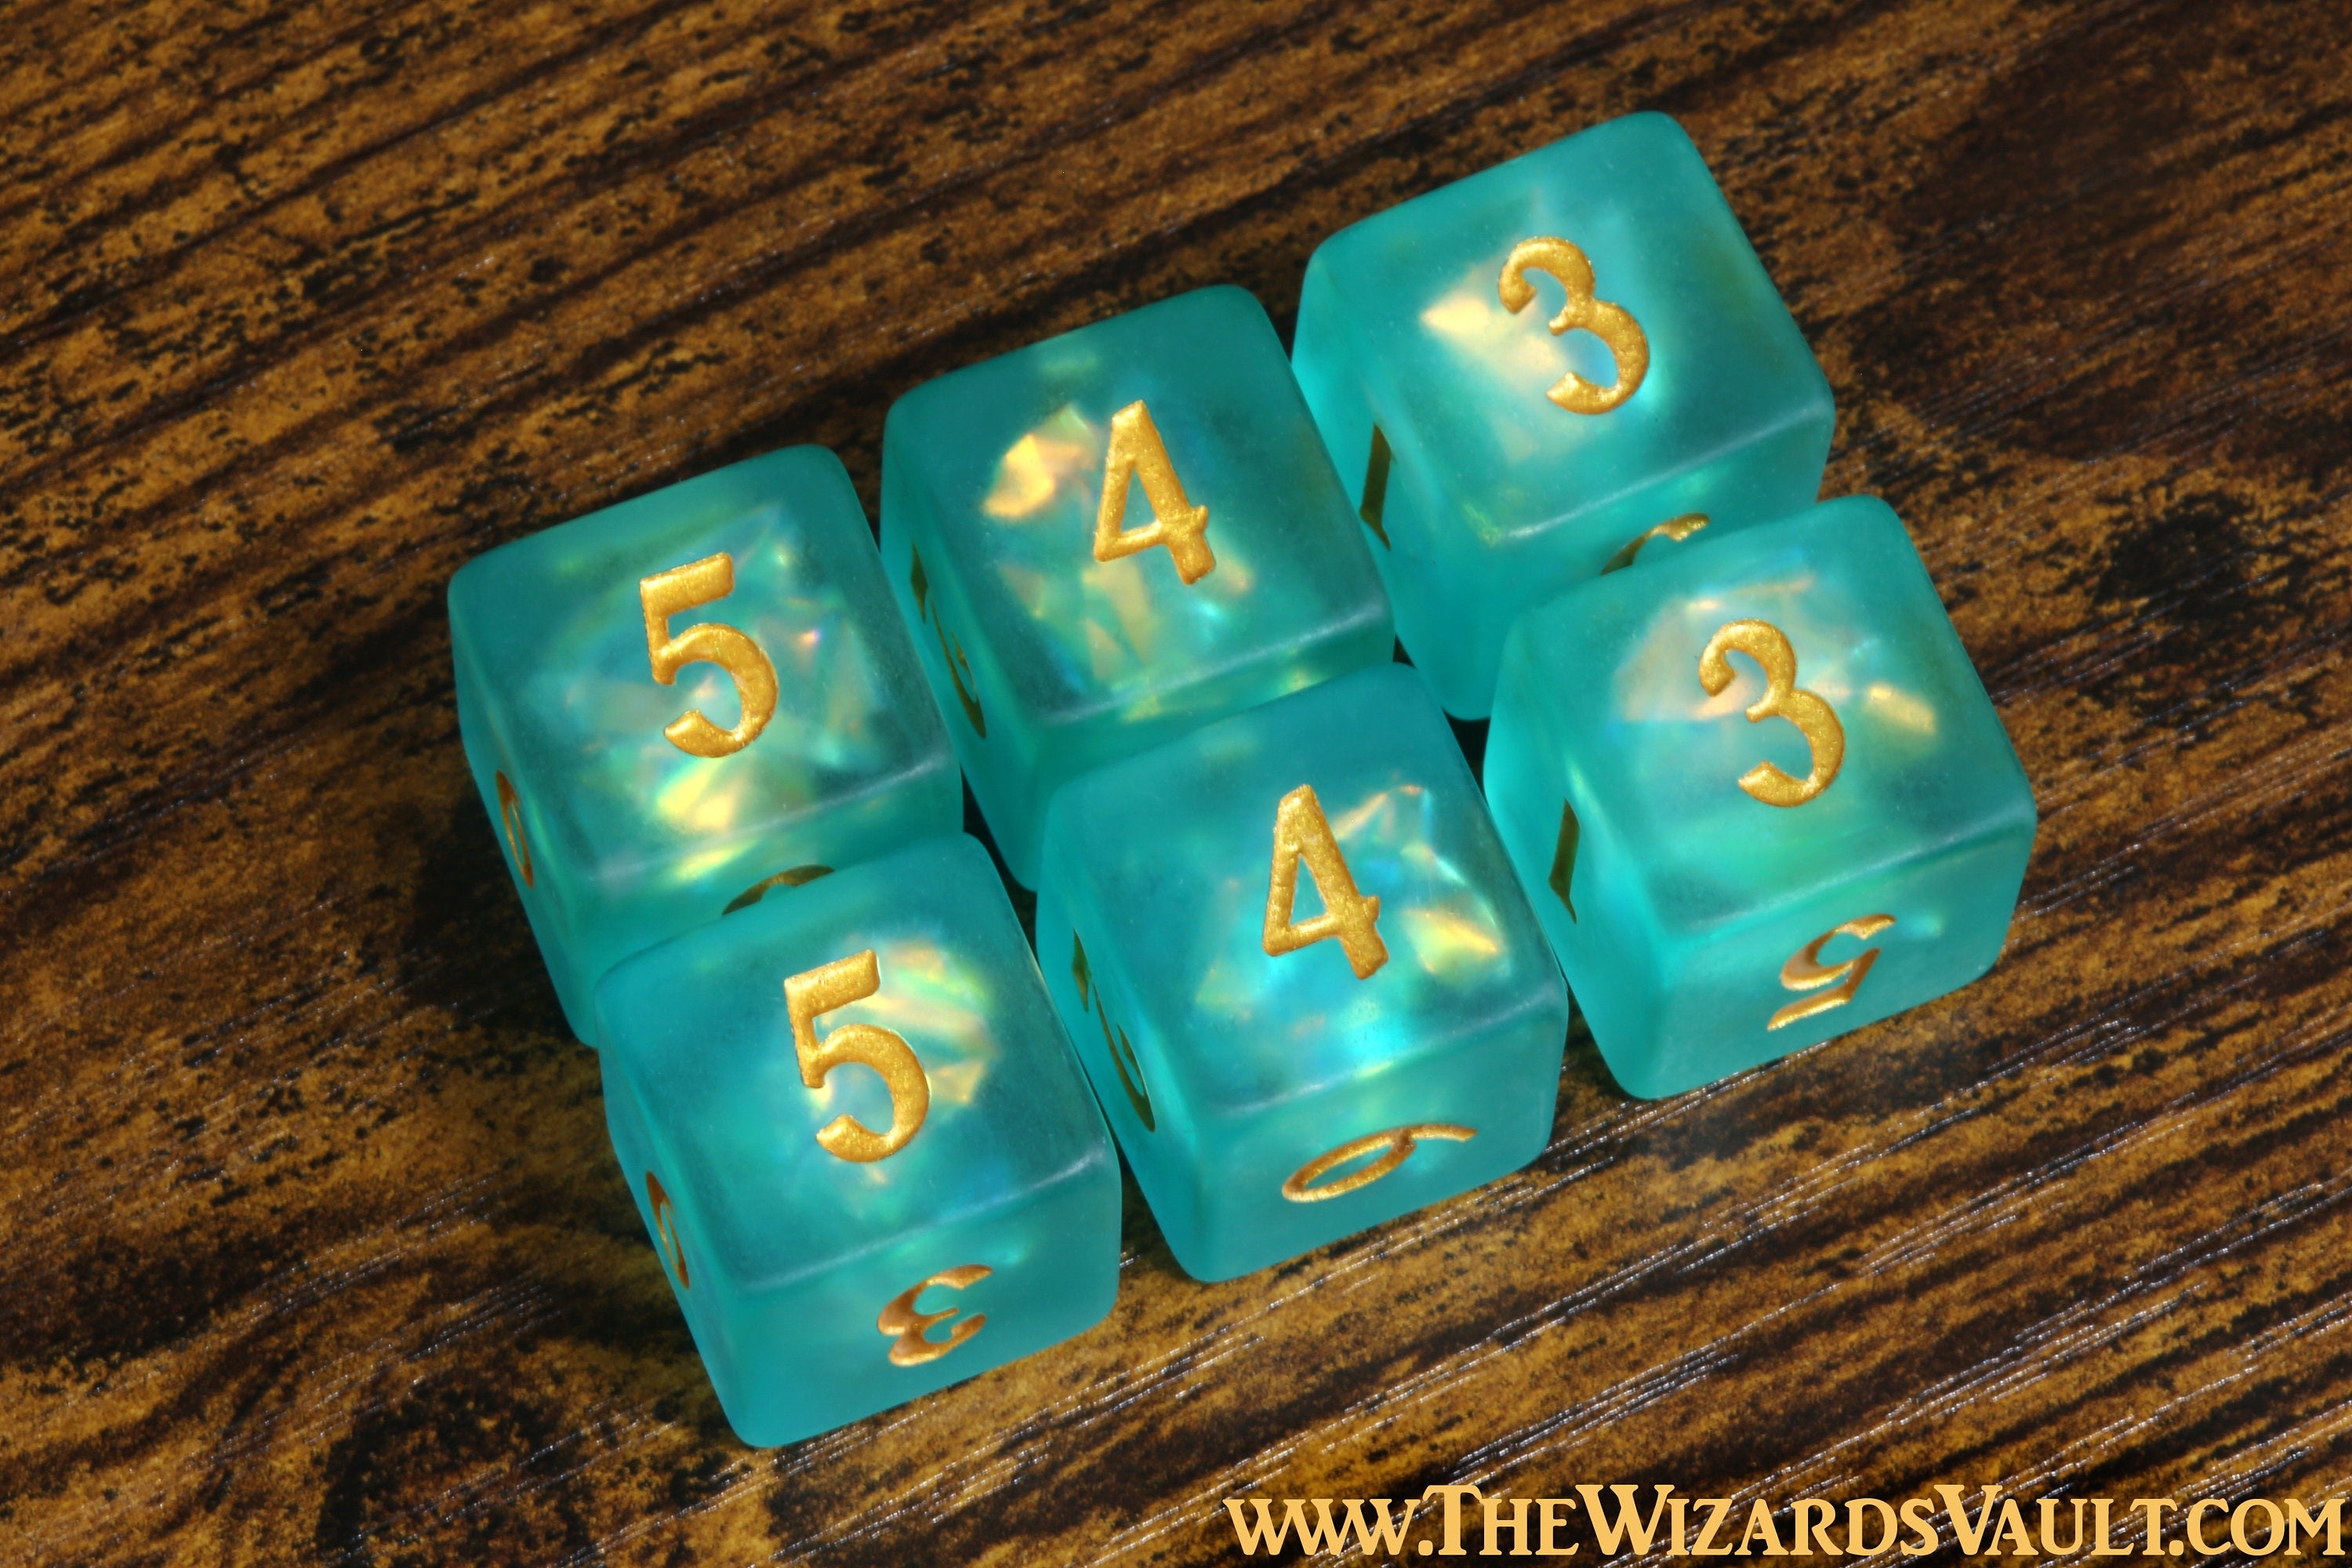 Leviathan's Soul D6 dice - Turquoise green Holographic inclusions, Frosted